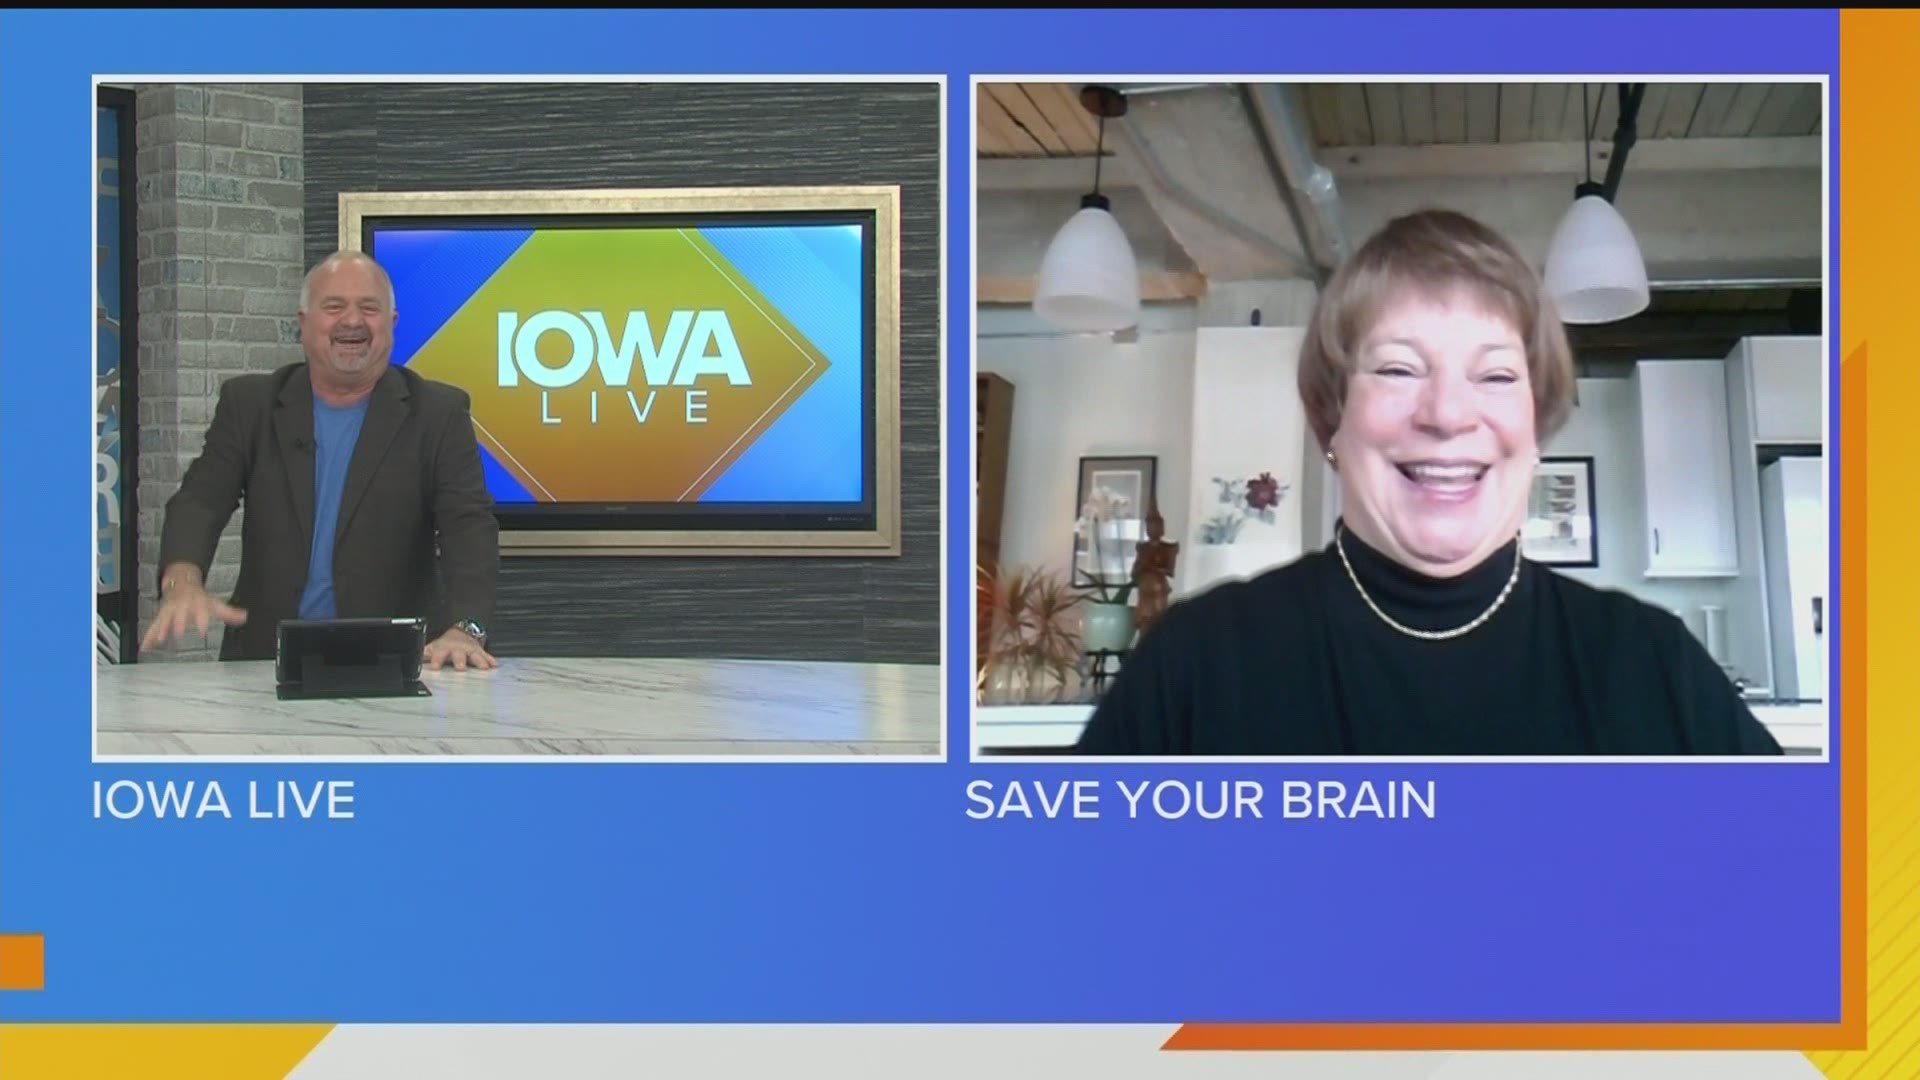 SAVE YOUR BRAIN Campaign with Dr. Patty Quinlisk and information on classes to reduce your risk of dementia